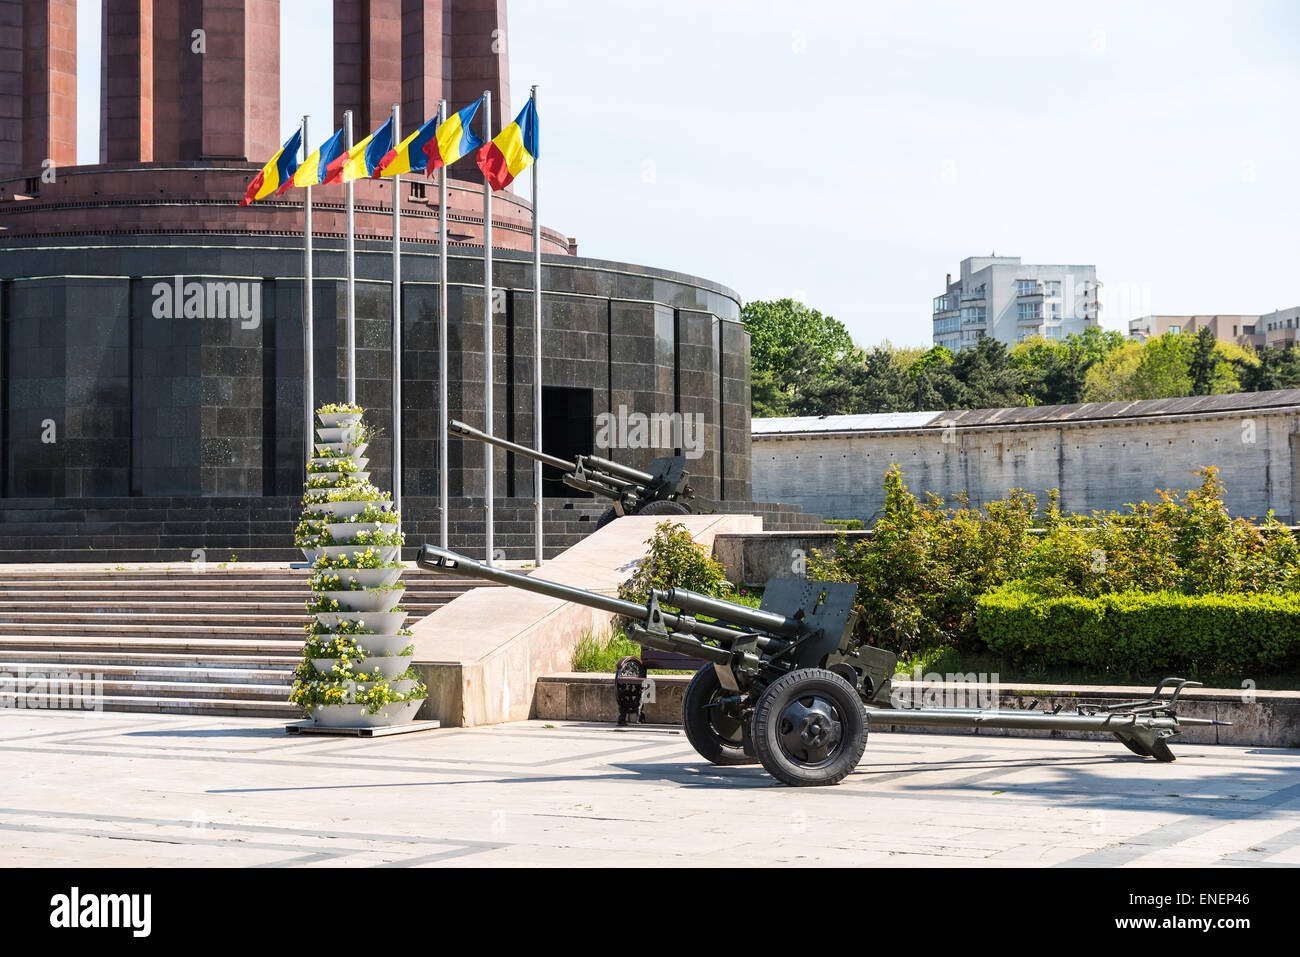 The Mausoleum Of Romanian Heroes was built in 1963 and it is located in Carol Park in Bucharest Romania. Stock Photo